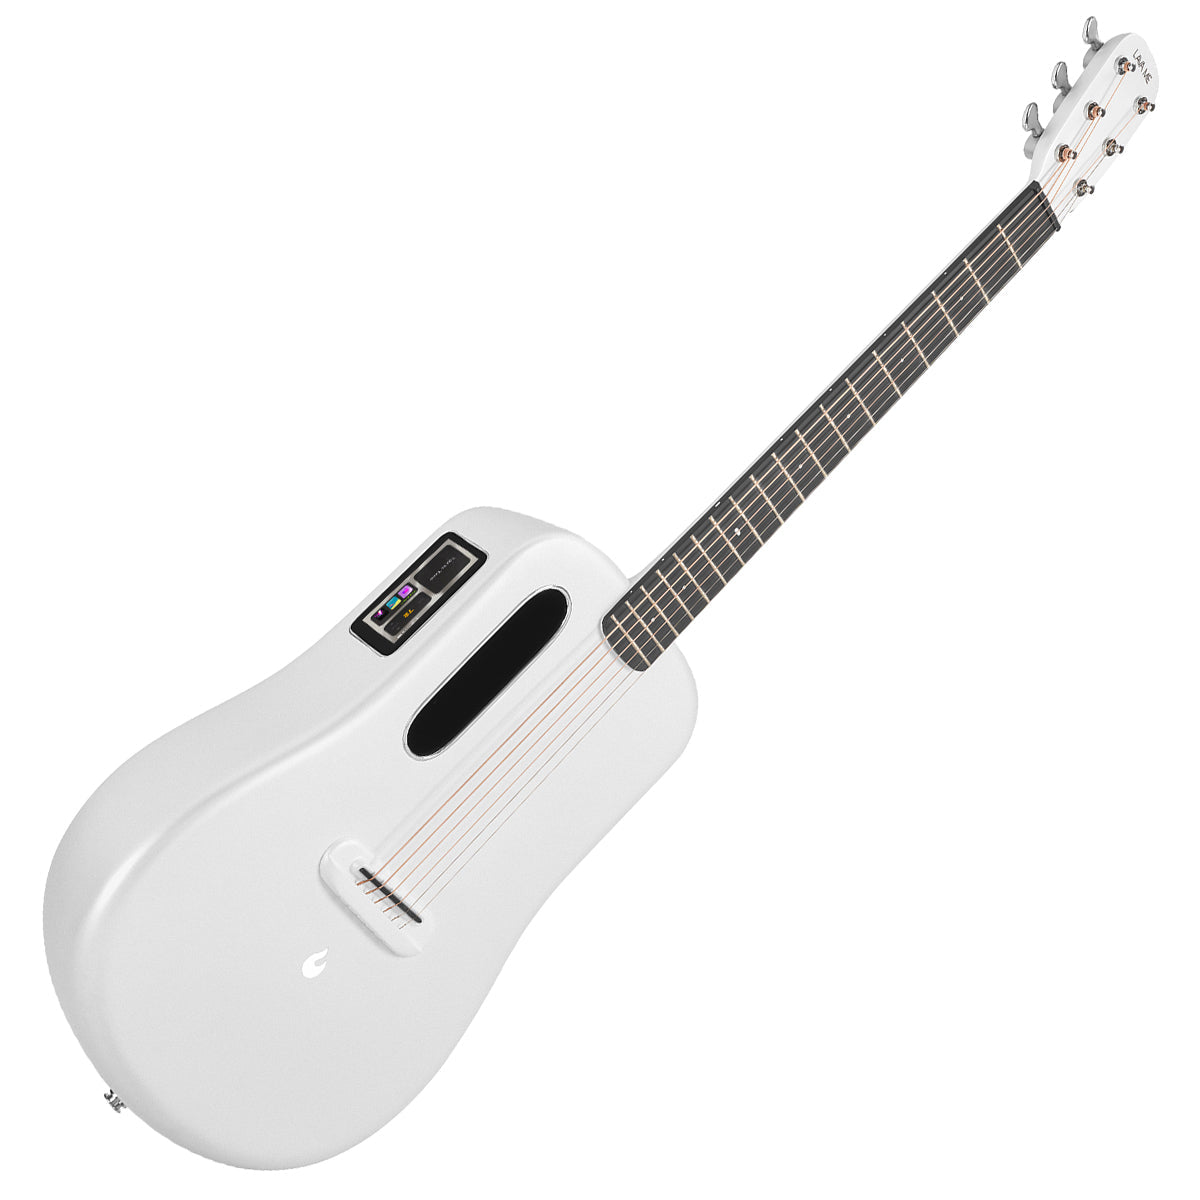 LAVA ME 3 36" with Ideal Bag ~ White, Acoustic Guitar for sale at Richards Guitars.